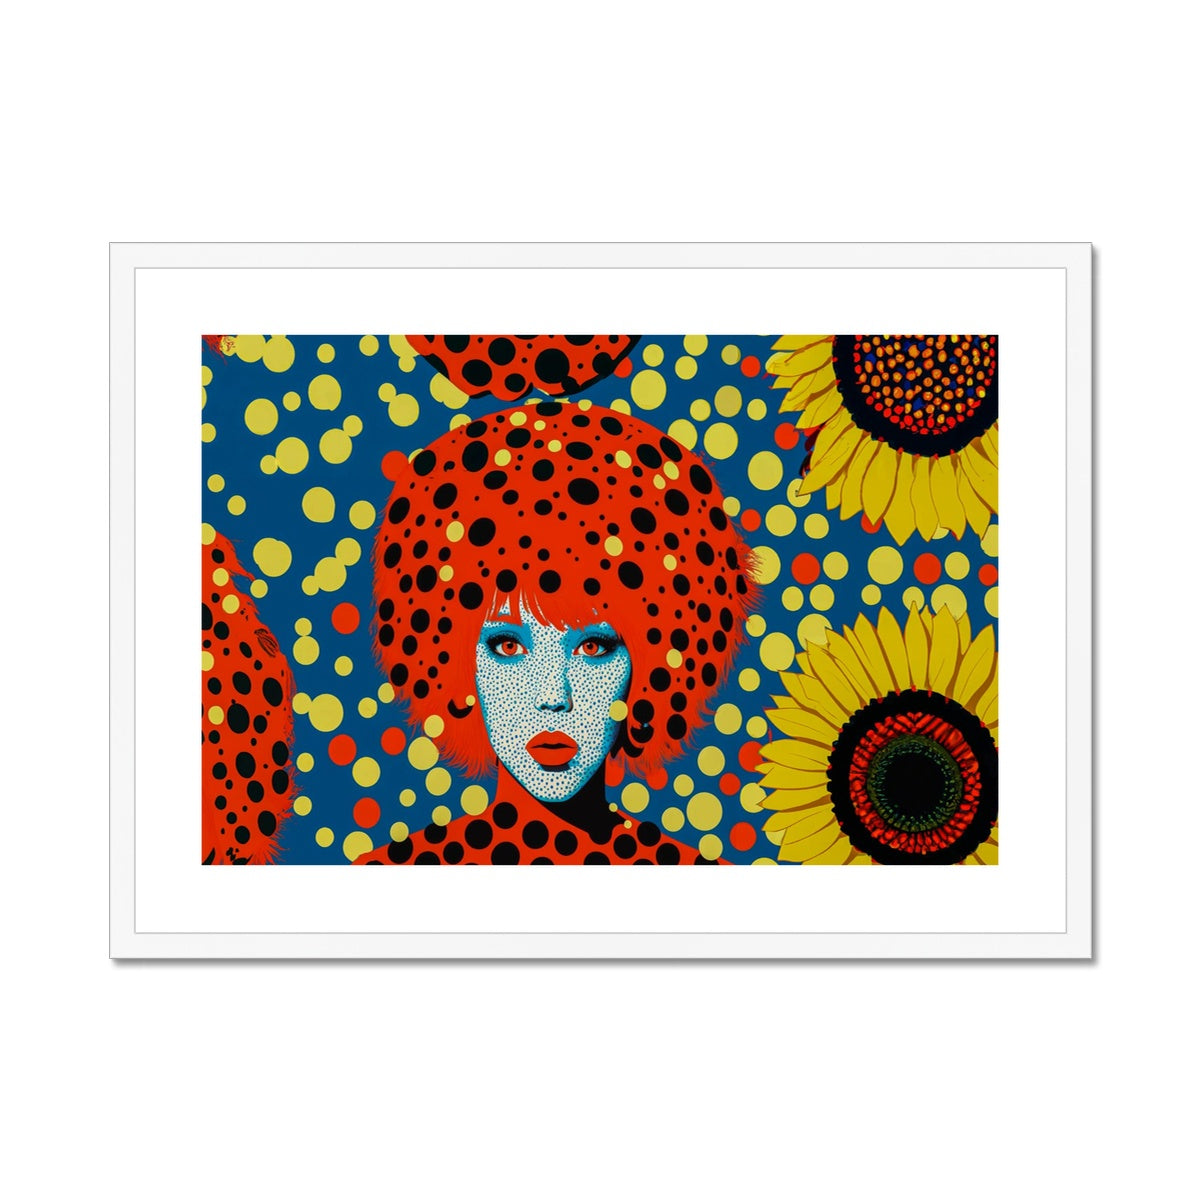 Yayoi Framed & Mounted Print - Pixel Gallery